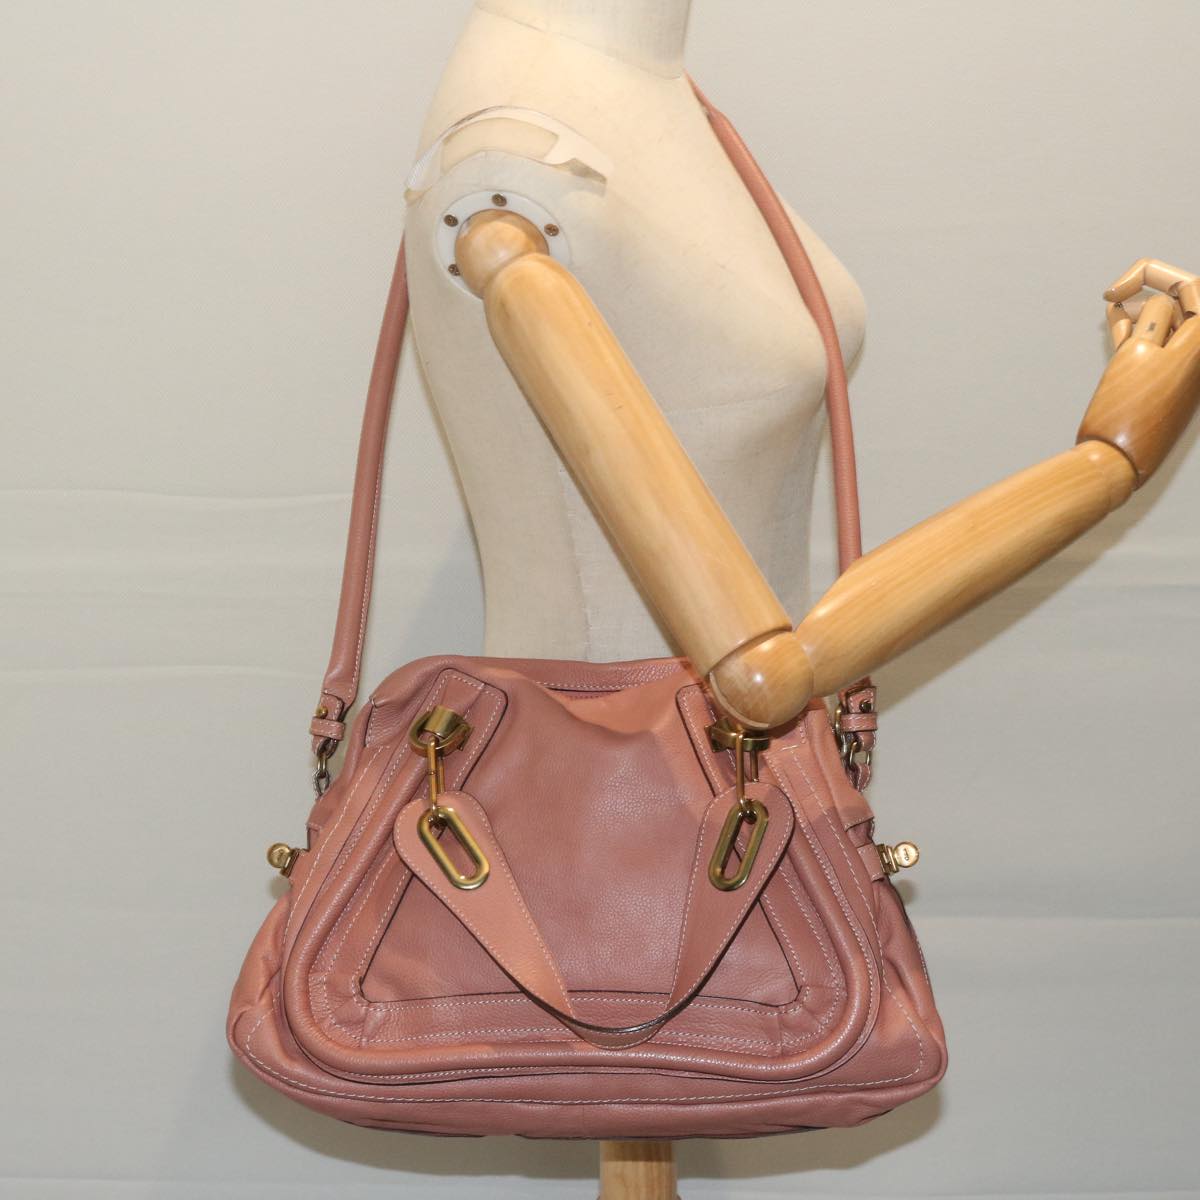 Chloe Paraty Shoulder Bag Leather 2way Pink Auth am5444